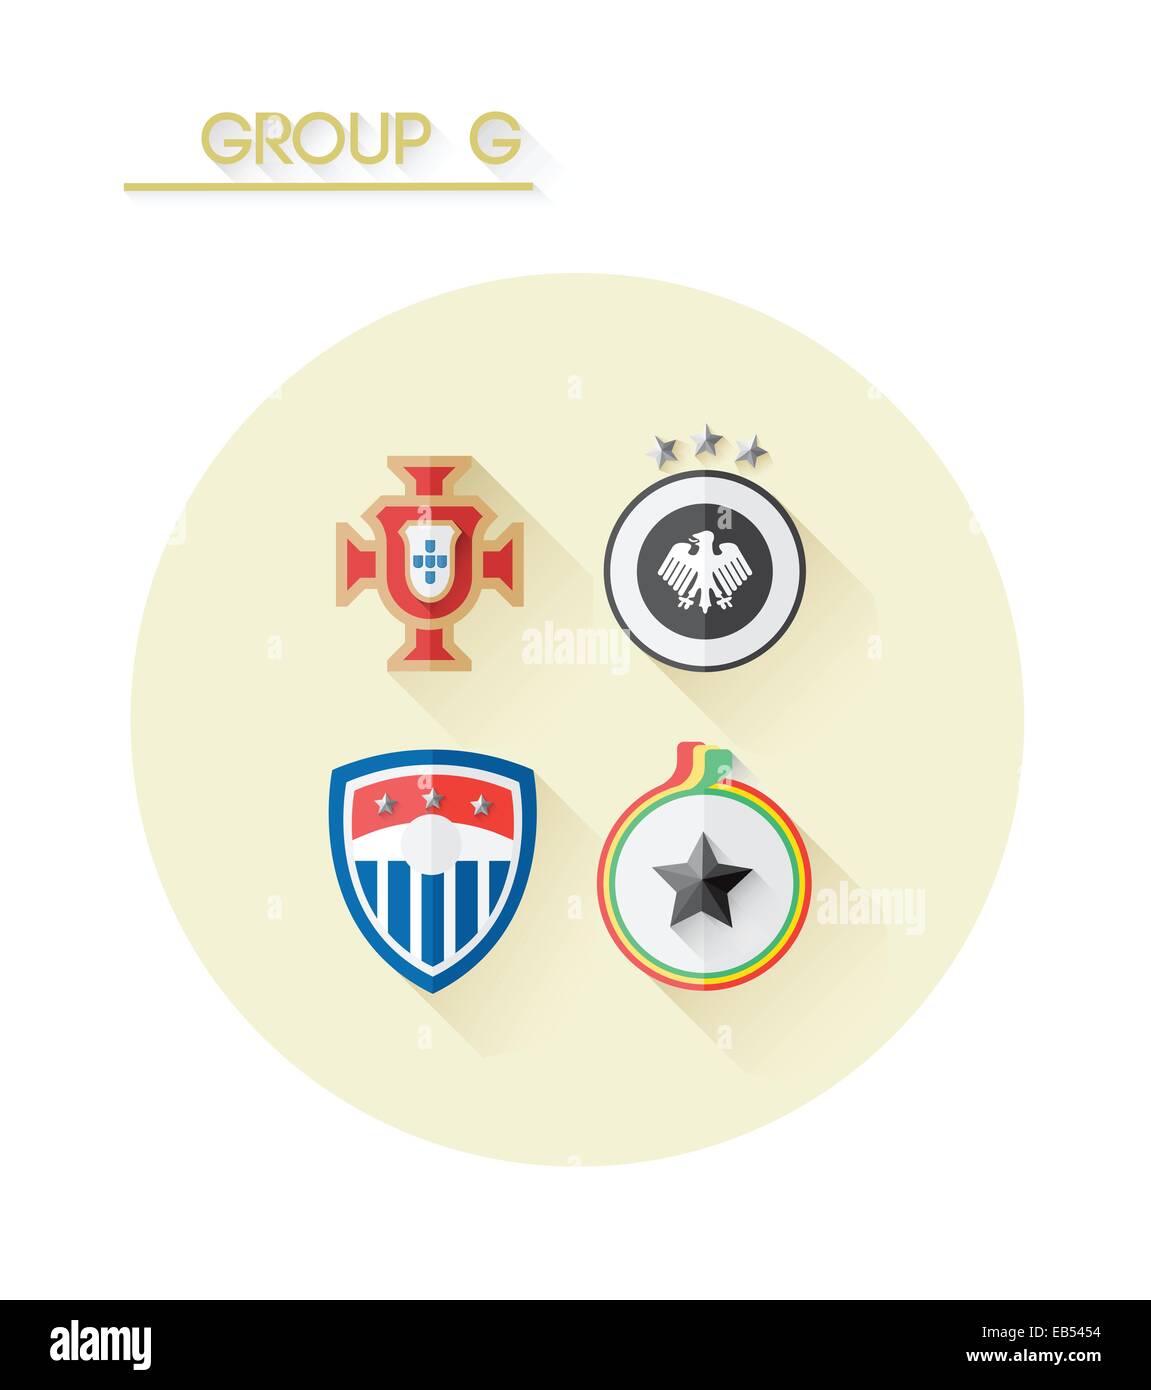 Group g with country crests Stock Vector